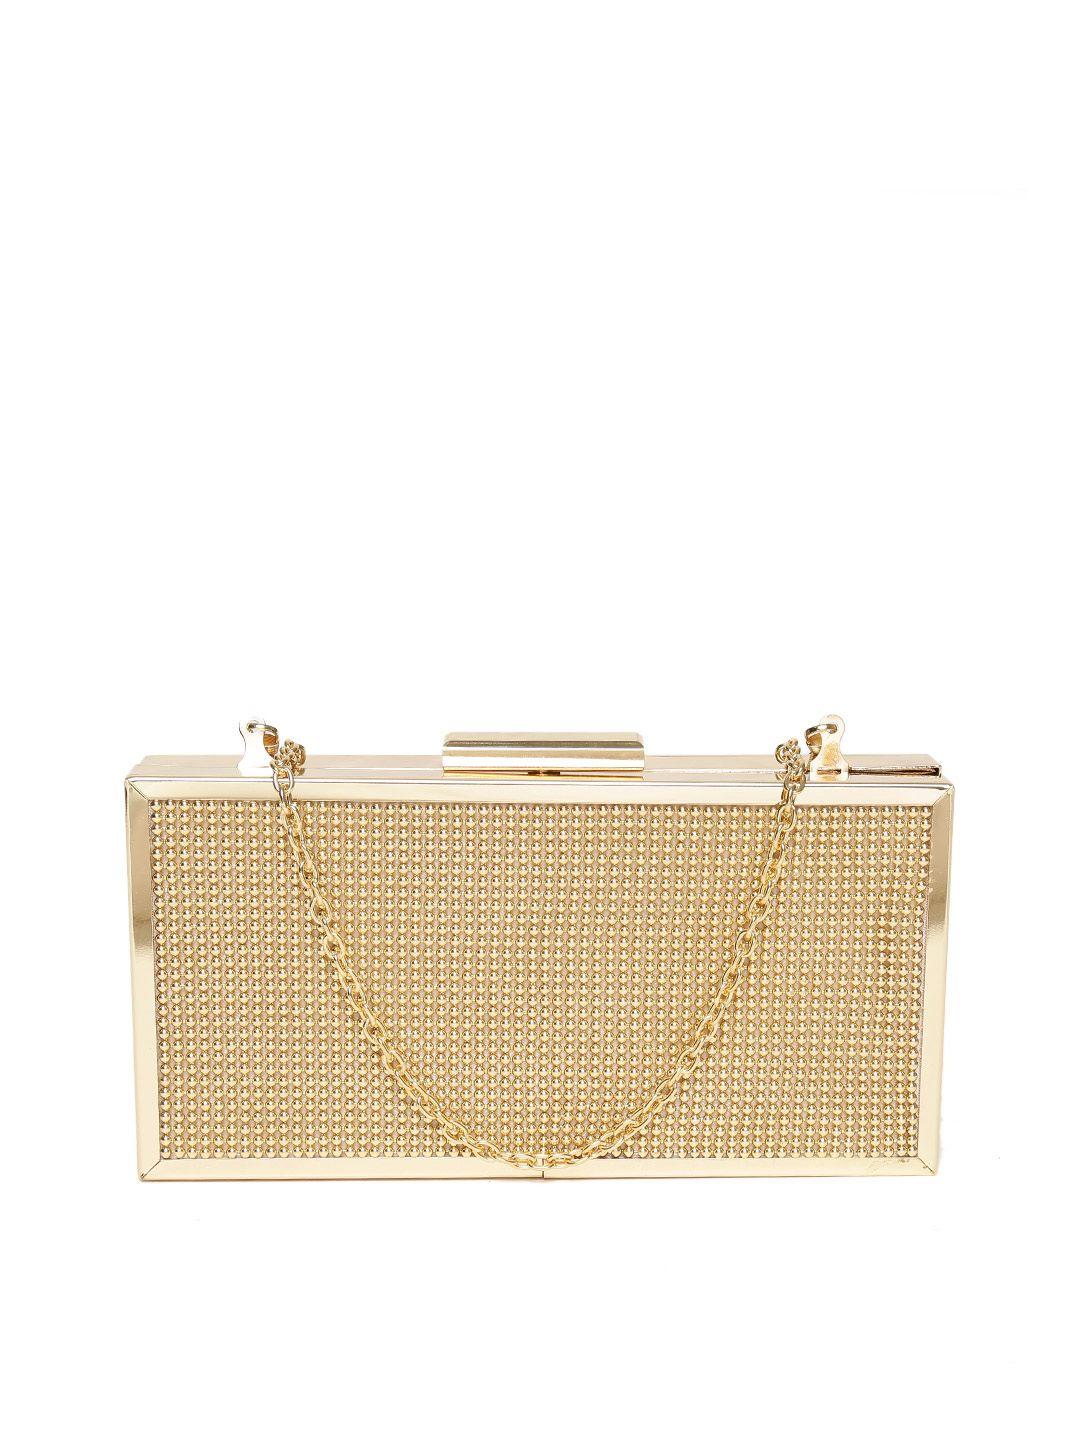 giordano gold-toned textured box clutch with chain strap